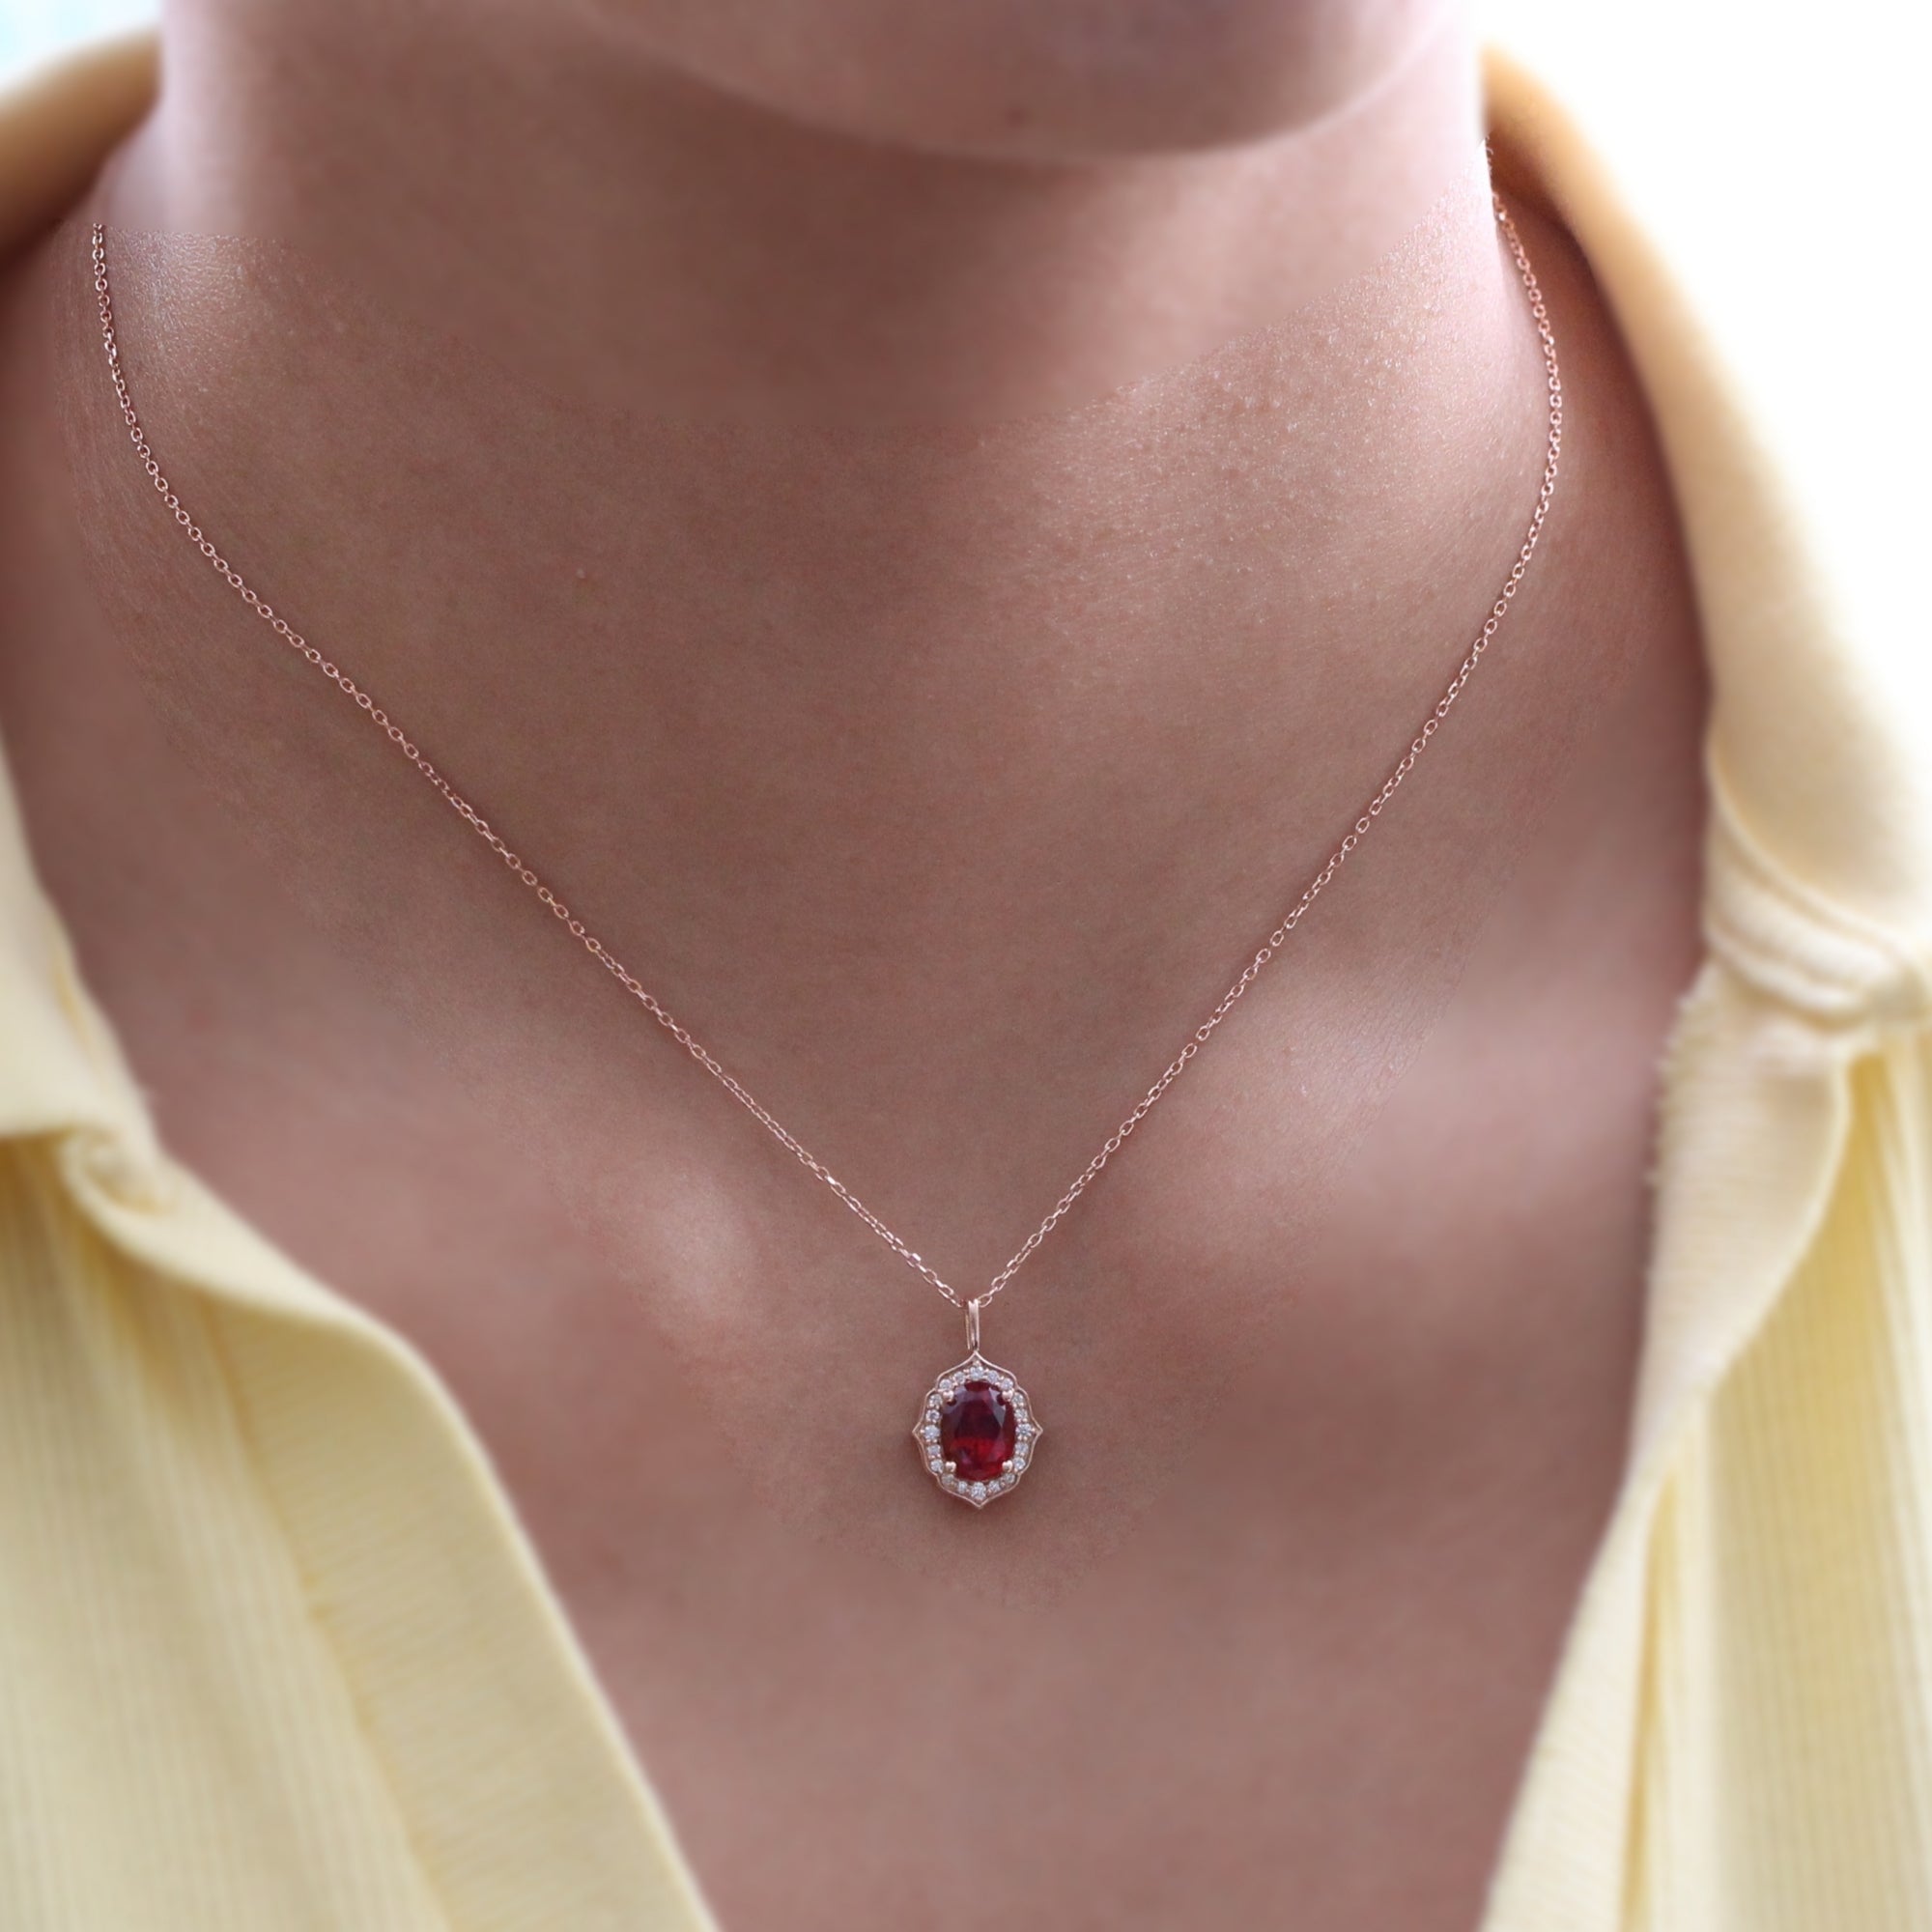 Vintage Style Oval Ruby Necklace Rose Gold Halo Diamond Pendant Chain